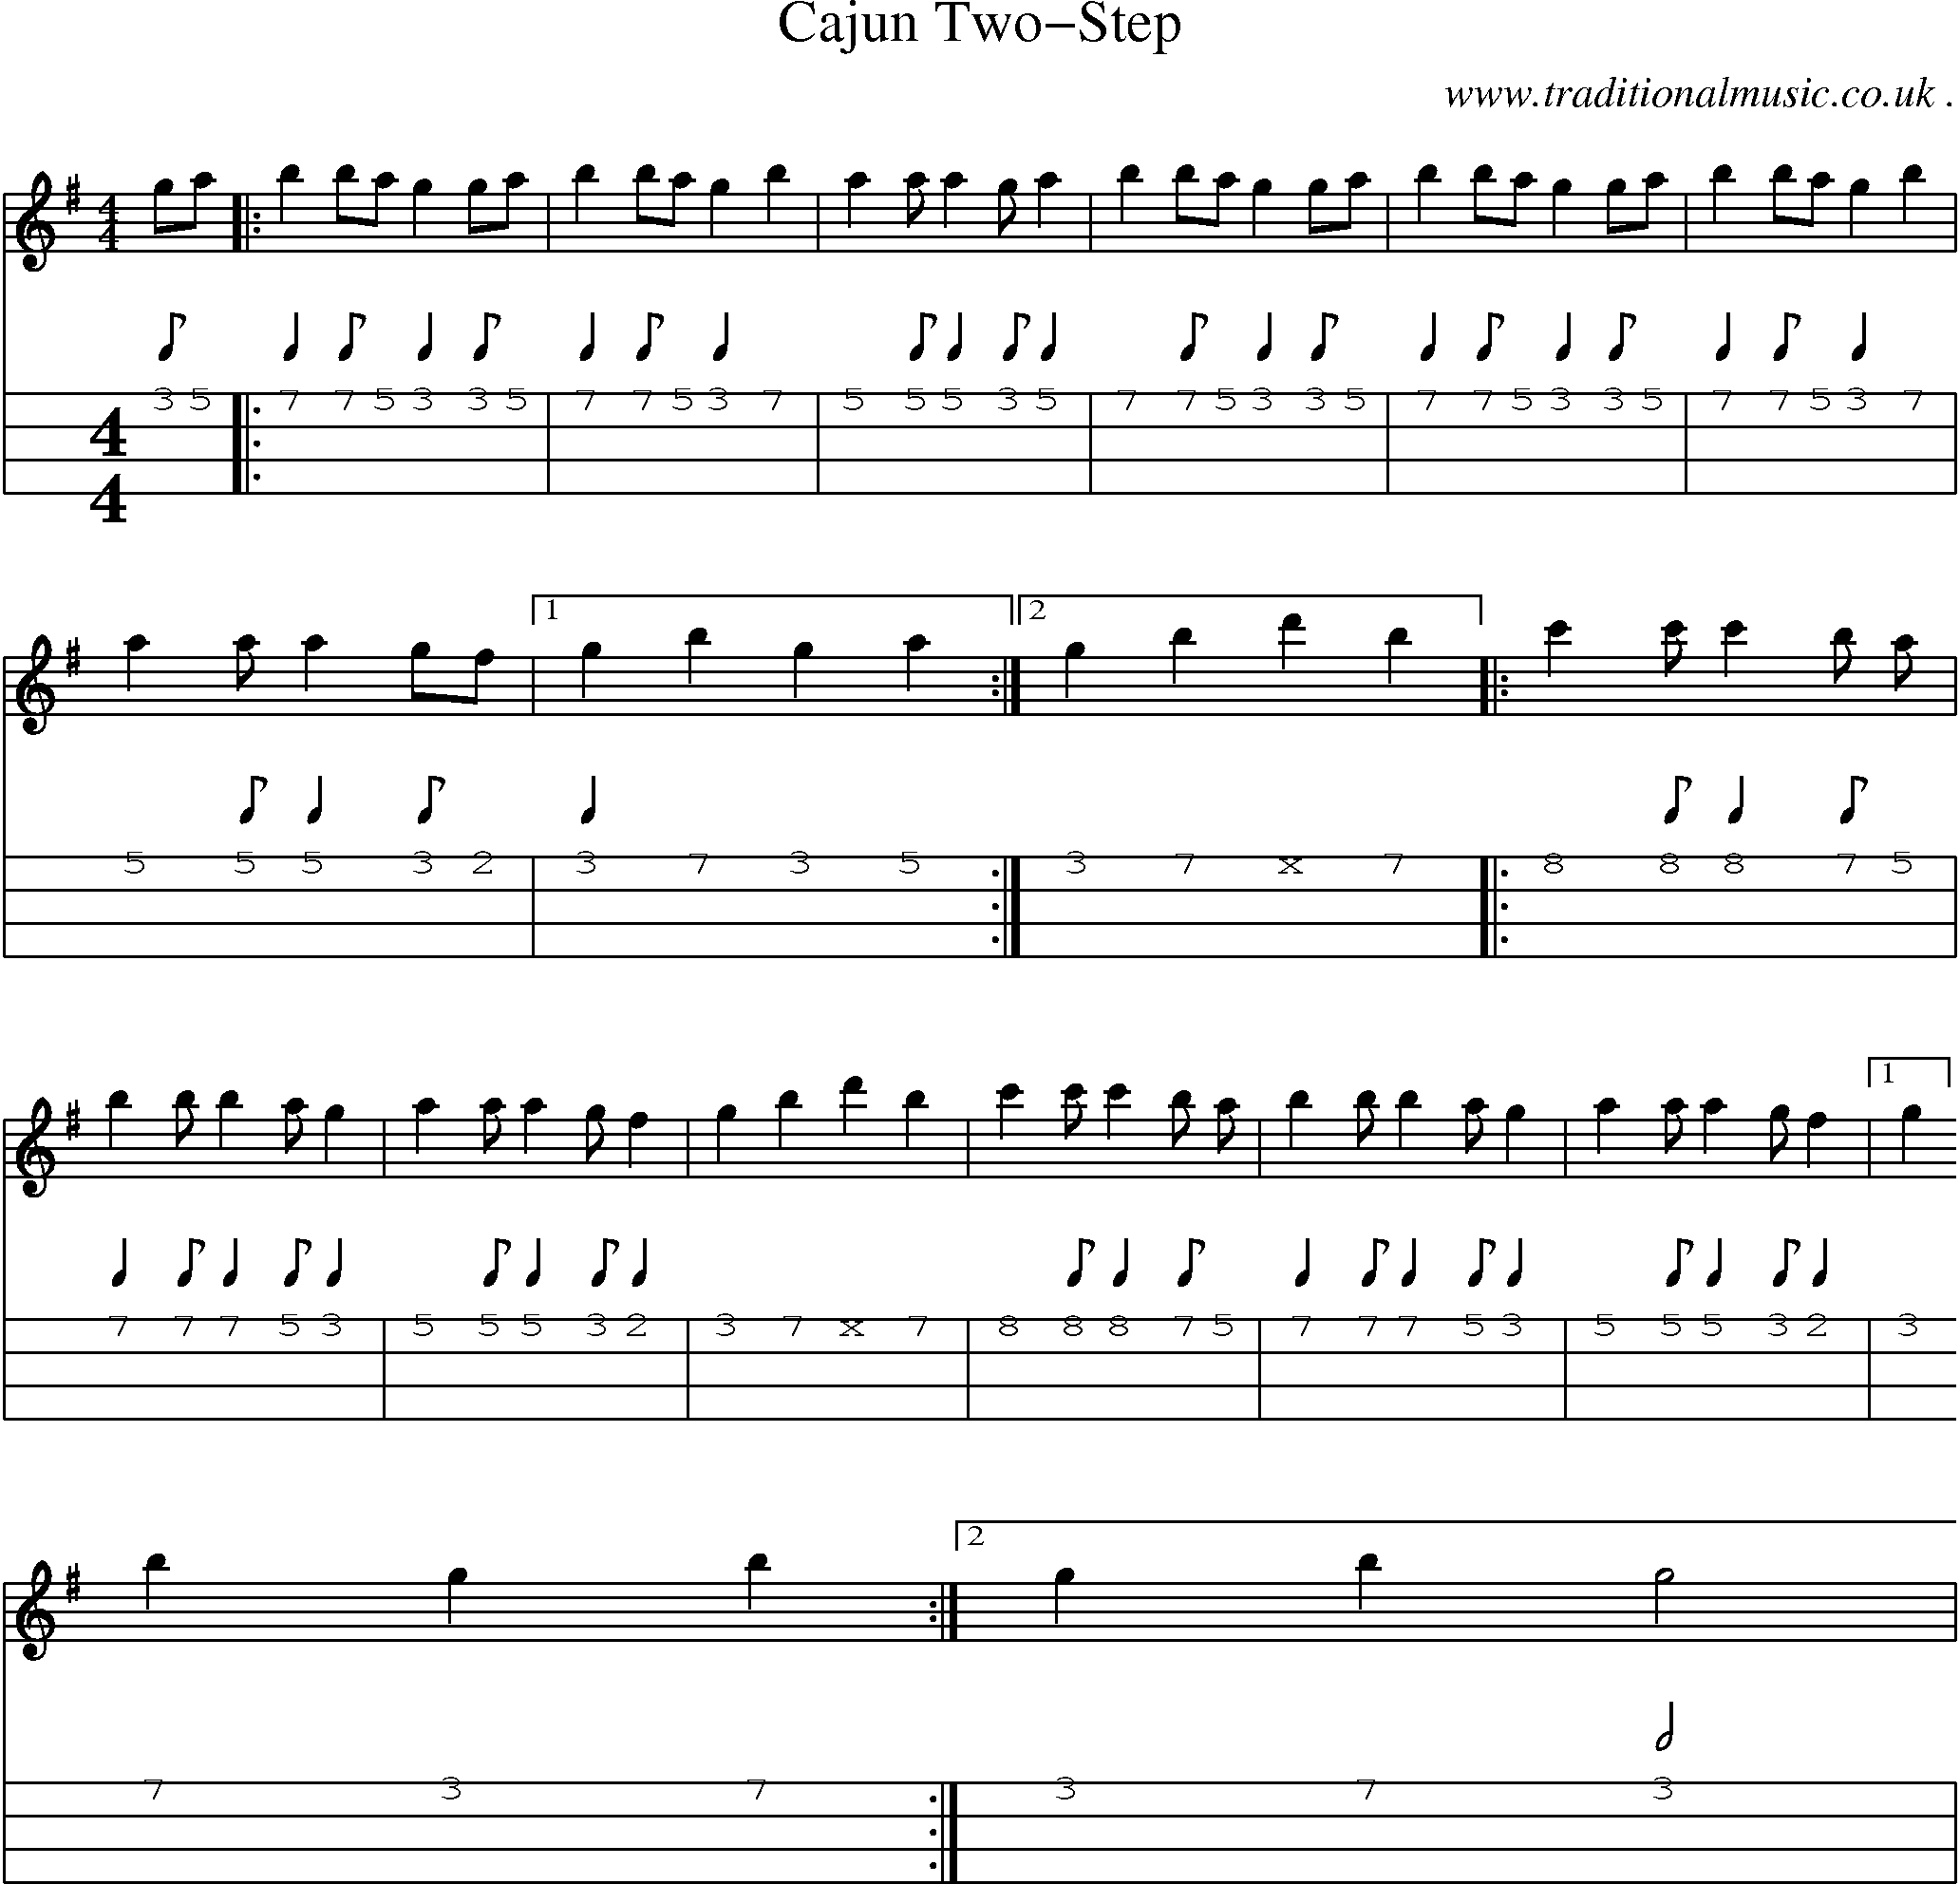 Music Score and Guitar Tabs for Cajun Two-step